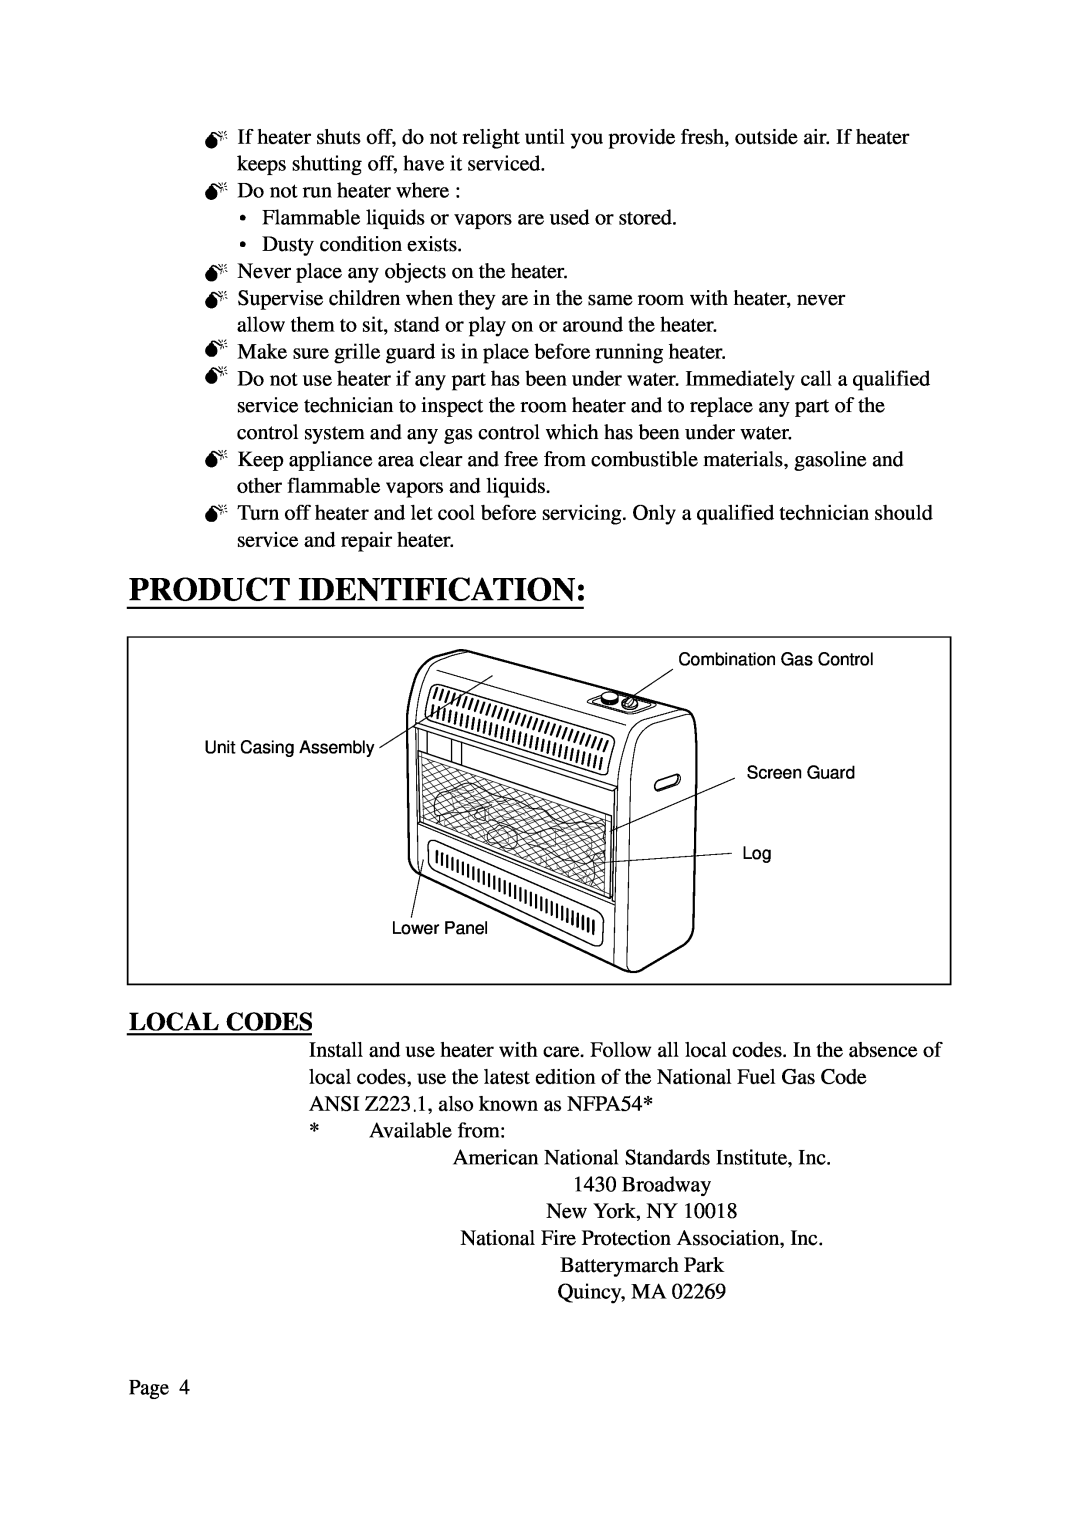 Gas-Fired Products KLH601, 602-30 installation manual Product Identification, Local Codes 